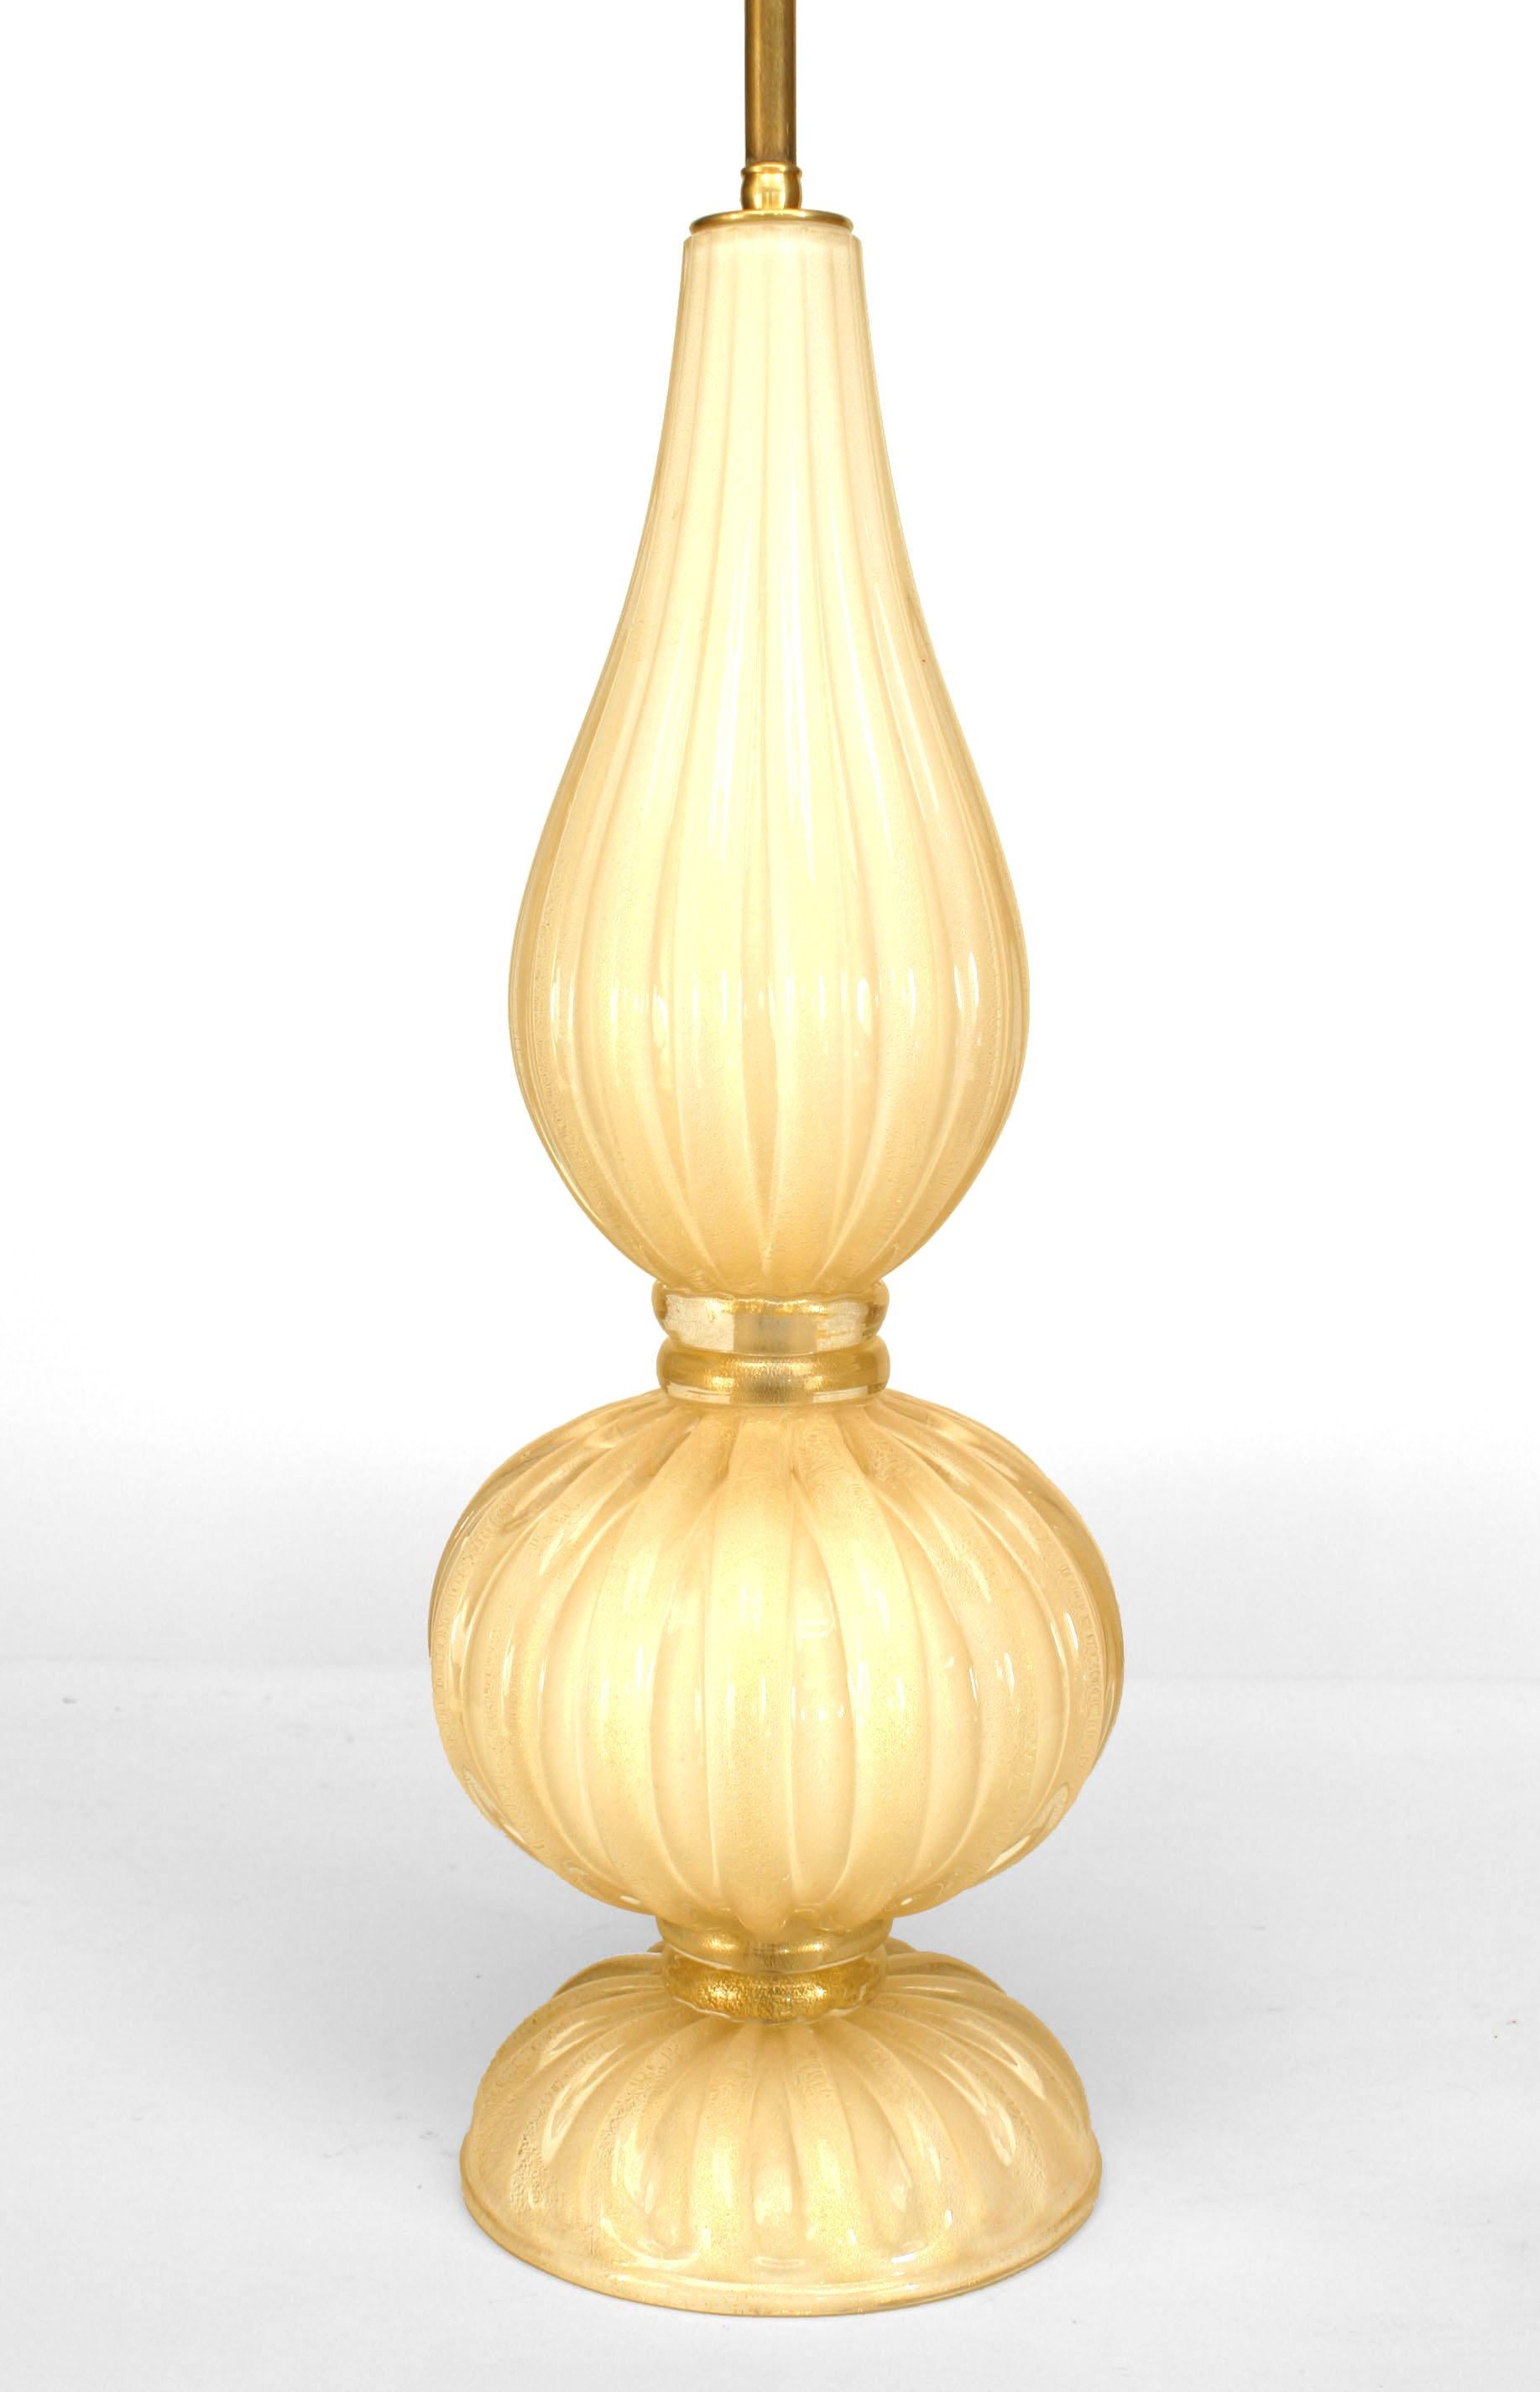 A Pair of Italian Murano Mid-Century style light beige & gold dusted 